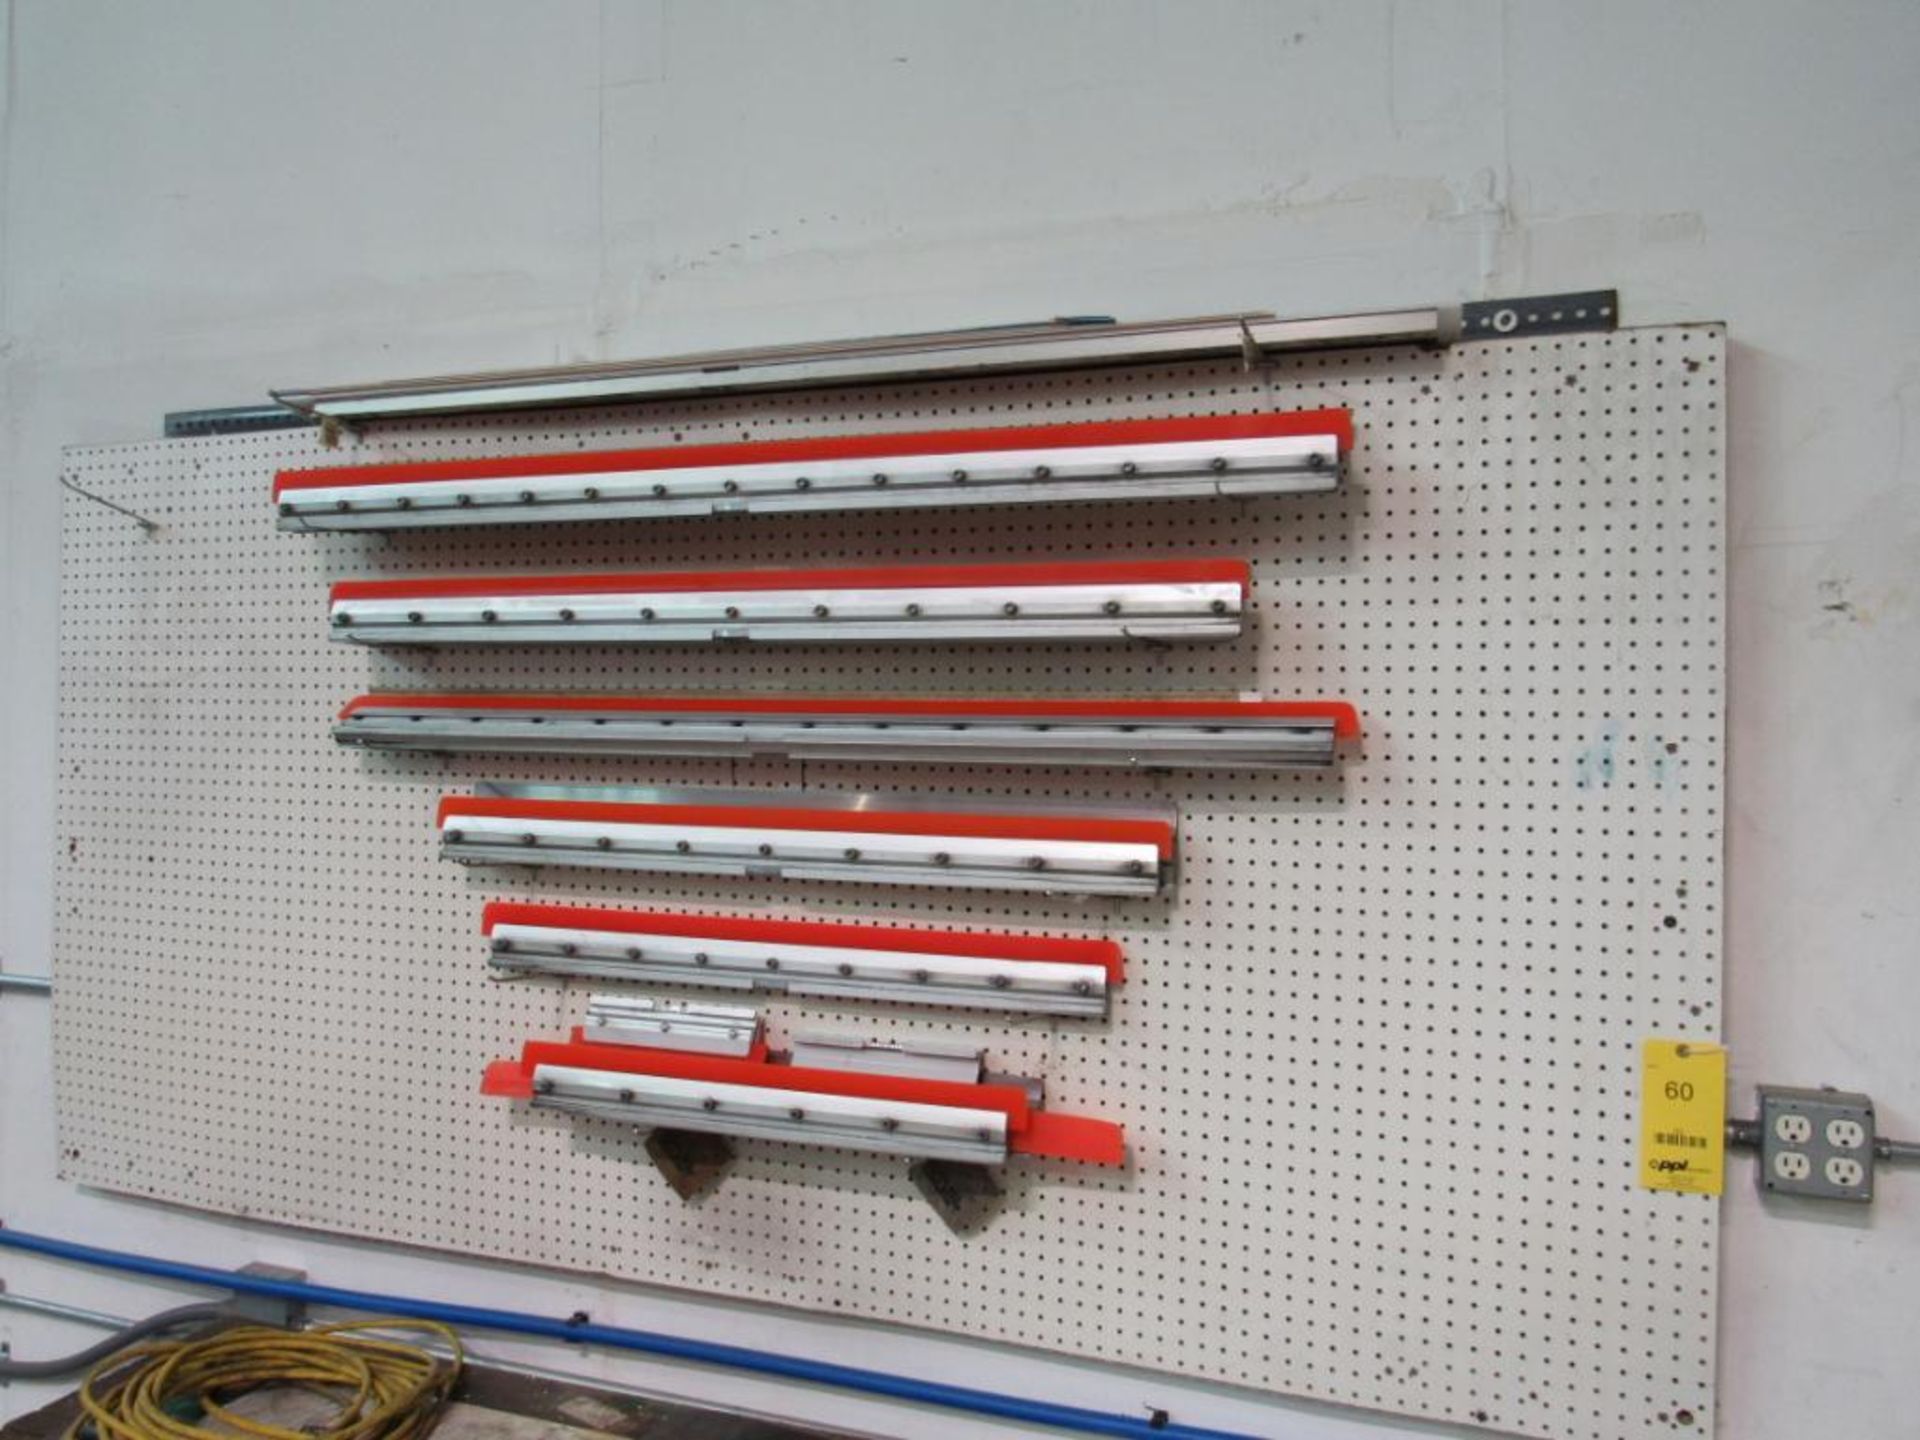 LOT: Assorted Squeegee's on Peg Board on Wall